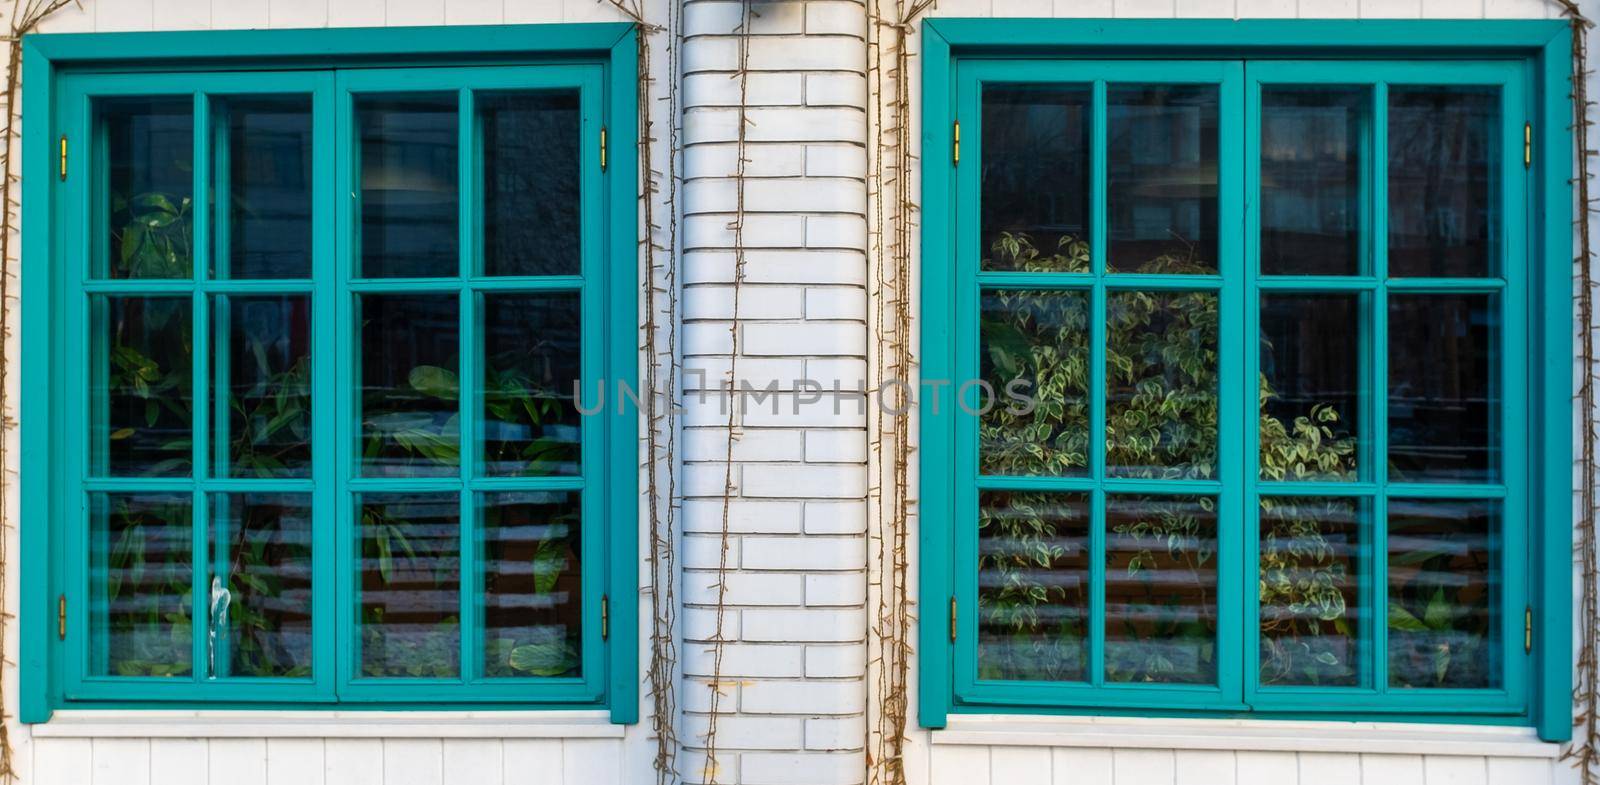 Two large turquoise windows on the veranda of a brick house.